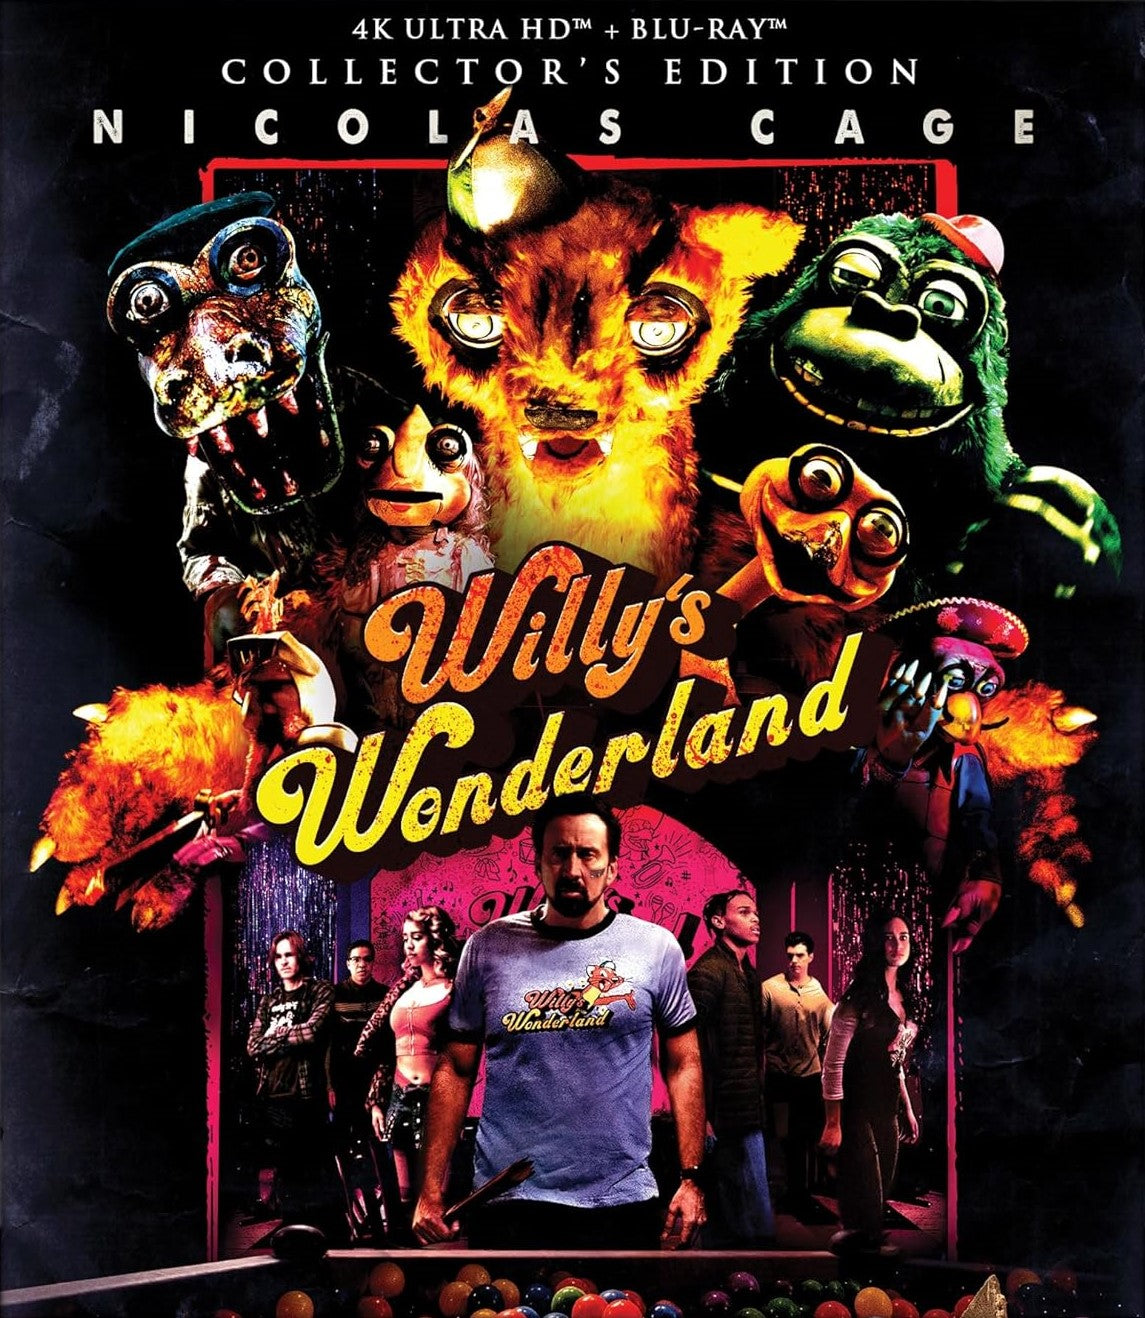 WILLY'S WONDERLAND (COLLECTOR'S EDITION) 4K UHD/BLU-RAY